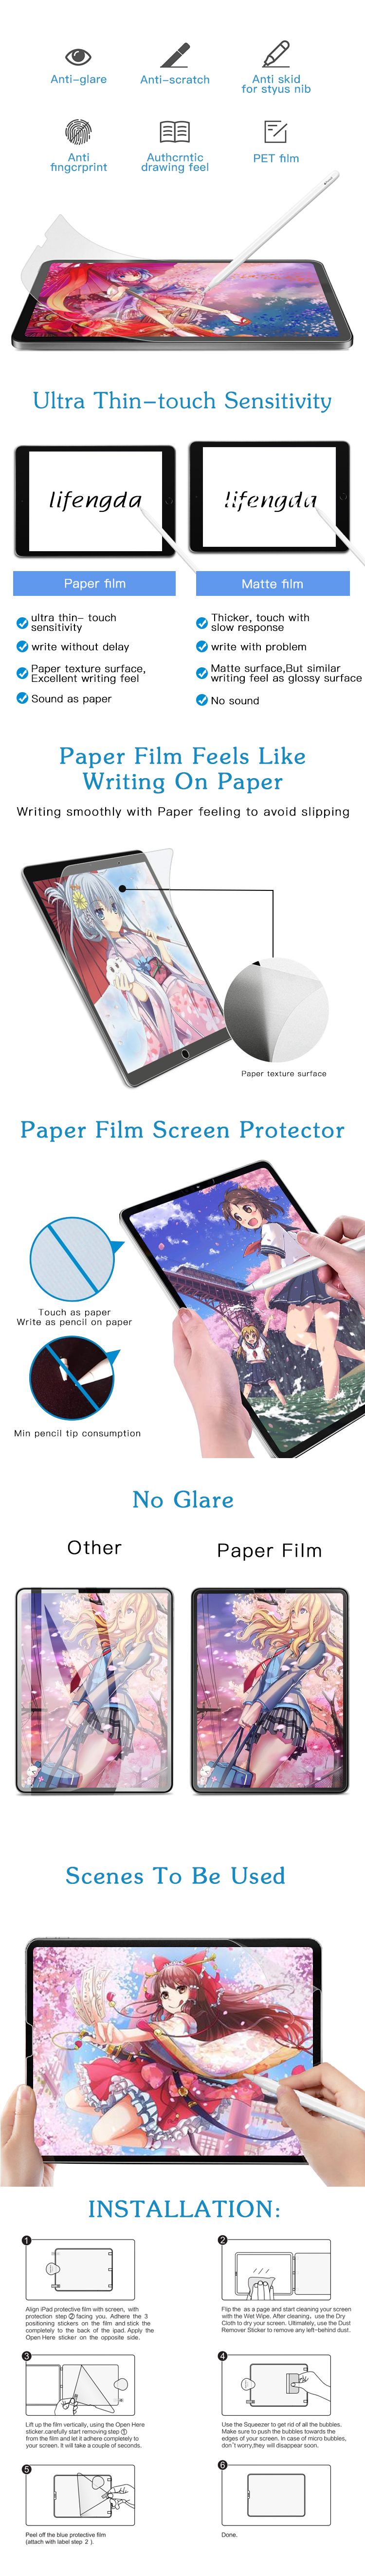 Hot anti-glare paper feeling film like paper screen protector for iPad Pro 12.9inch  2017